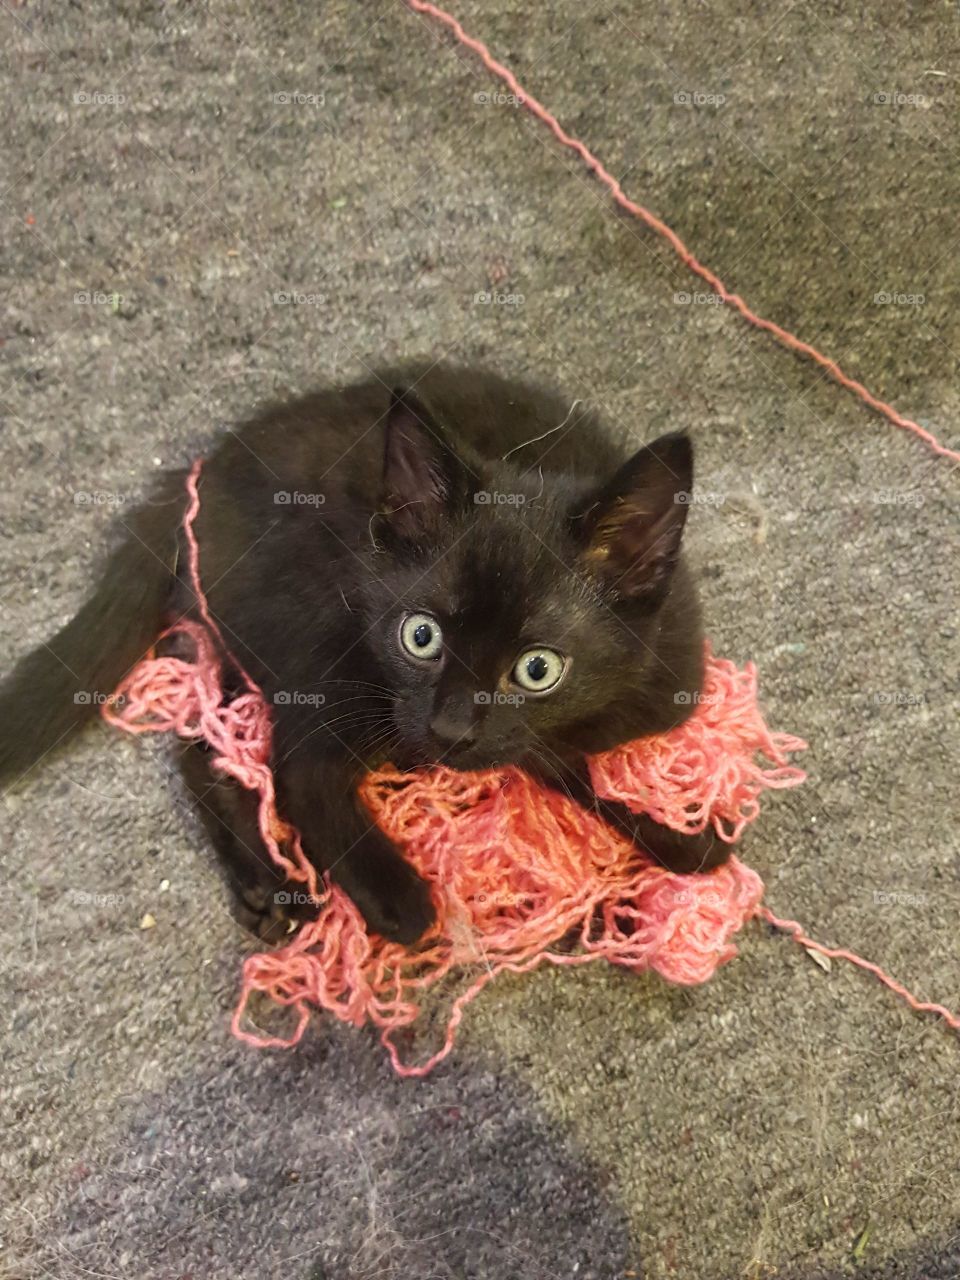 Killer the kitten loves to play with the wool. Pounces out of no where and is full of life.